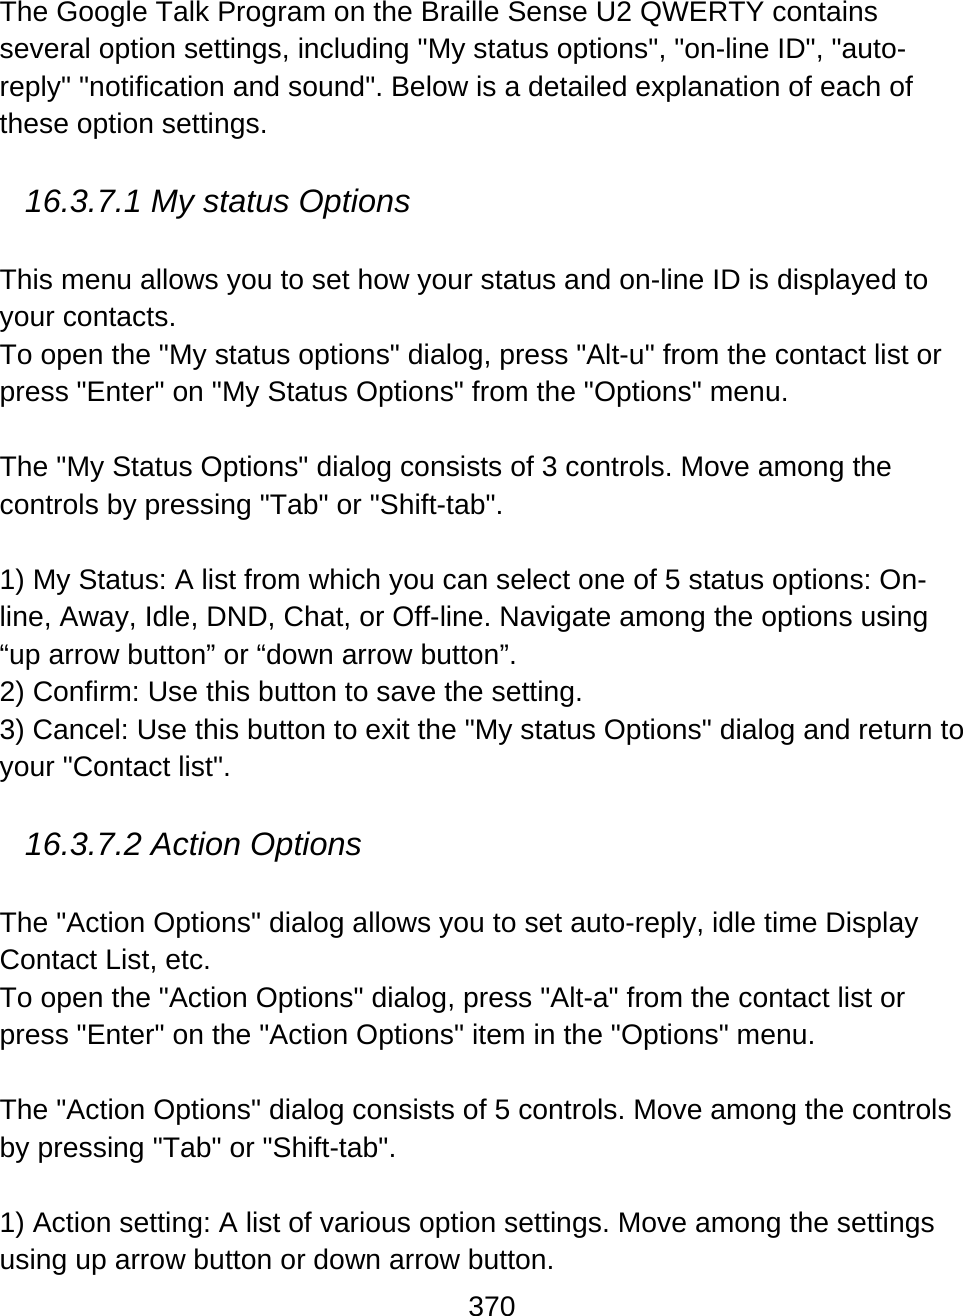 370  The Google Talk Program on the Braille Sense U2 QWERTY contains several option settings, including &quot;My status options&quot;, &quot;on-line ID&quot;, &quot;auto-reply&quot; &quot;notification and sound&quot;. Below is a detailed explanation of each of these option settings.   16.3.7.1 My status Options  This menu allows you to set how your status and on-line ID is displayed to your contacts.  To open the &quot;My status options&quot; dialog, press &quot;Alt-u&quot; from the contact list or press &quot;Enter&quot; on &quot;My Status Options&quot; from the &quot;Options&quot; menu.  The &quot;My Status Options&quot; dialog consists of 3 controls. Move among the controls by pressing &quot;Tab&quot; or &quot;Shift-tab&quot;.  1) My Status: A list from which you can select one of 5 status options: On-line, Away, Idle, DND, Chat, or Off-line. Navigate among the options using “up arrow button” or “down arrow button”. 2) Confirm: Use this button to save the setting. 3) Cancel: Use this button to exit the &quot;My status Options&quot; dialog and return to your &quot;Contact list&quot;.   16.3.7.2 Action Options  The &quot;Action Options&quot; dialog allows you to set auto-reply, idle time Display Contact List, etc.  To open the &quot;Action Options&quot; dialog, press &quot;Alt-a&quot; from the contact list or press &quot;Enter&quot; on the &quot;Action Options&quot; item in the &quot;Options&quot; menu.    The &quot;Action Options&quot; dialog consists of 5 controls. Move among the controls by pressing &quot;Tab&quot; or &quot;Shift-tab&quot;.  1) Action setting: A list of various option settings. Move among the settings using up arrow button or down arrow button.  